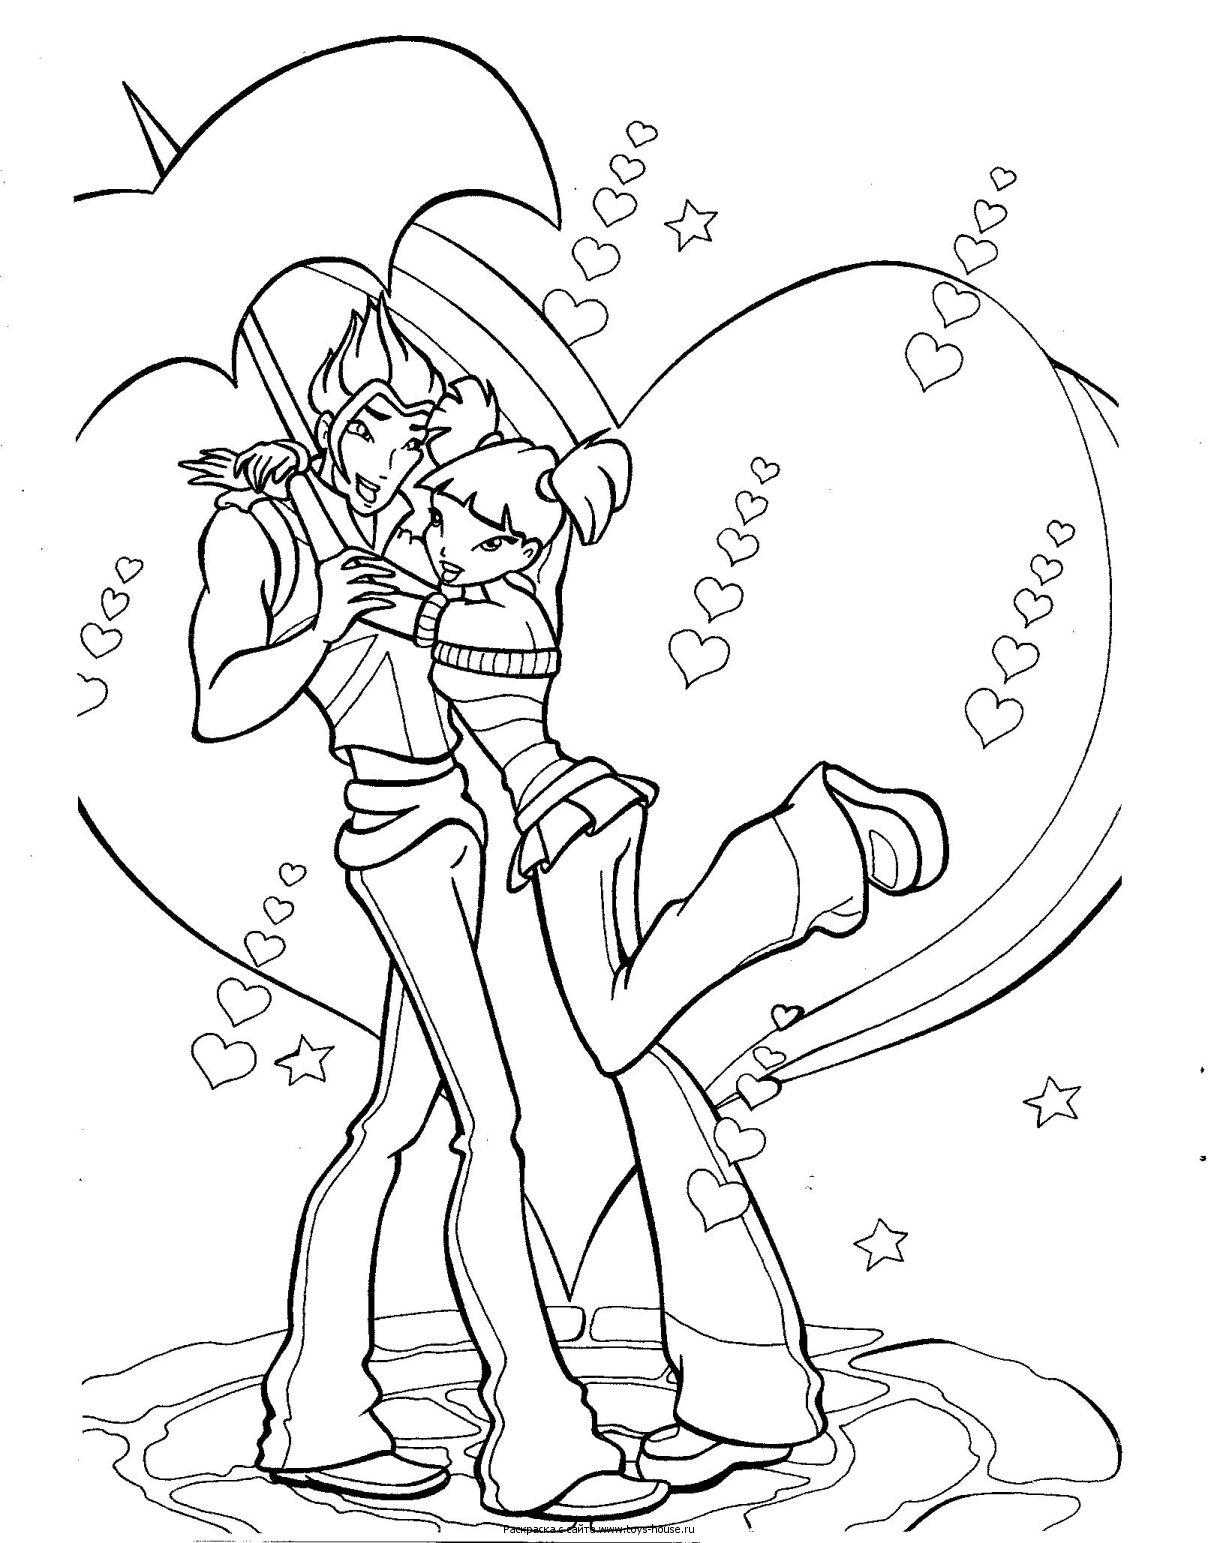  Winx Club Coloring Pages | Hot Winx Club |#14